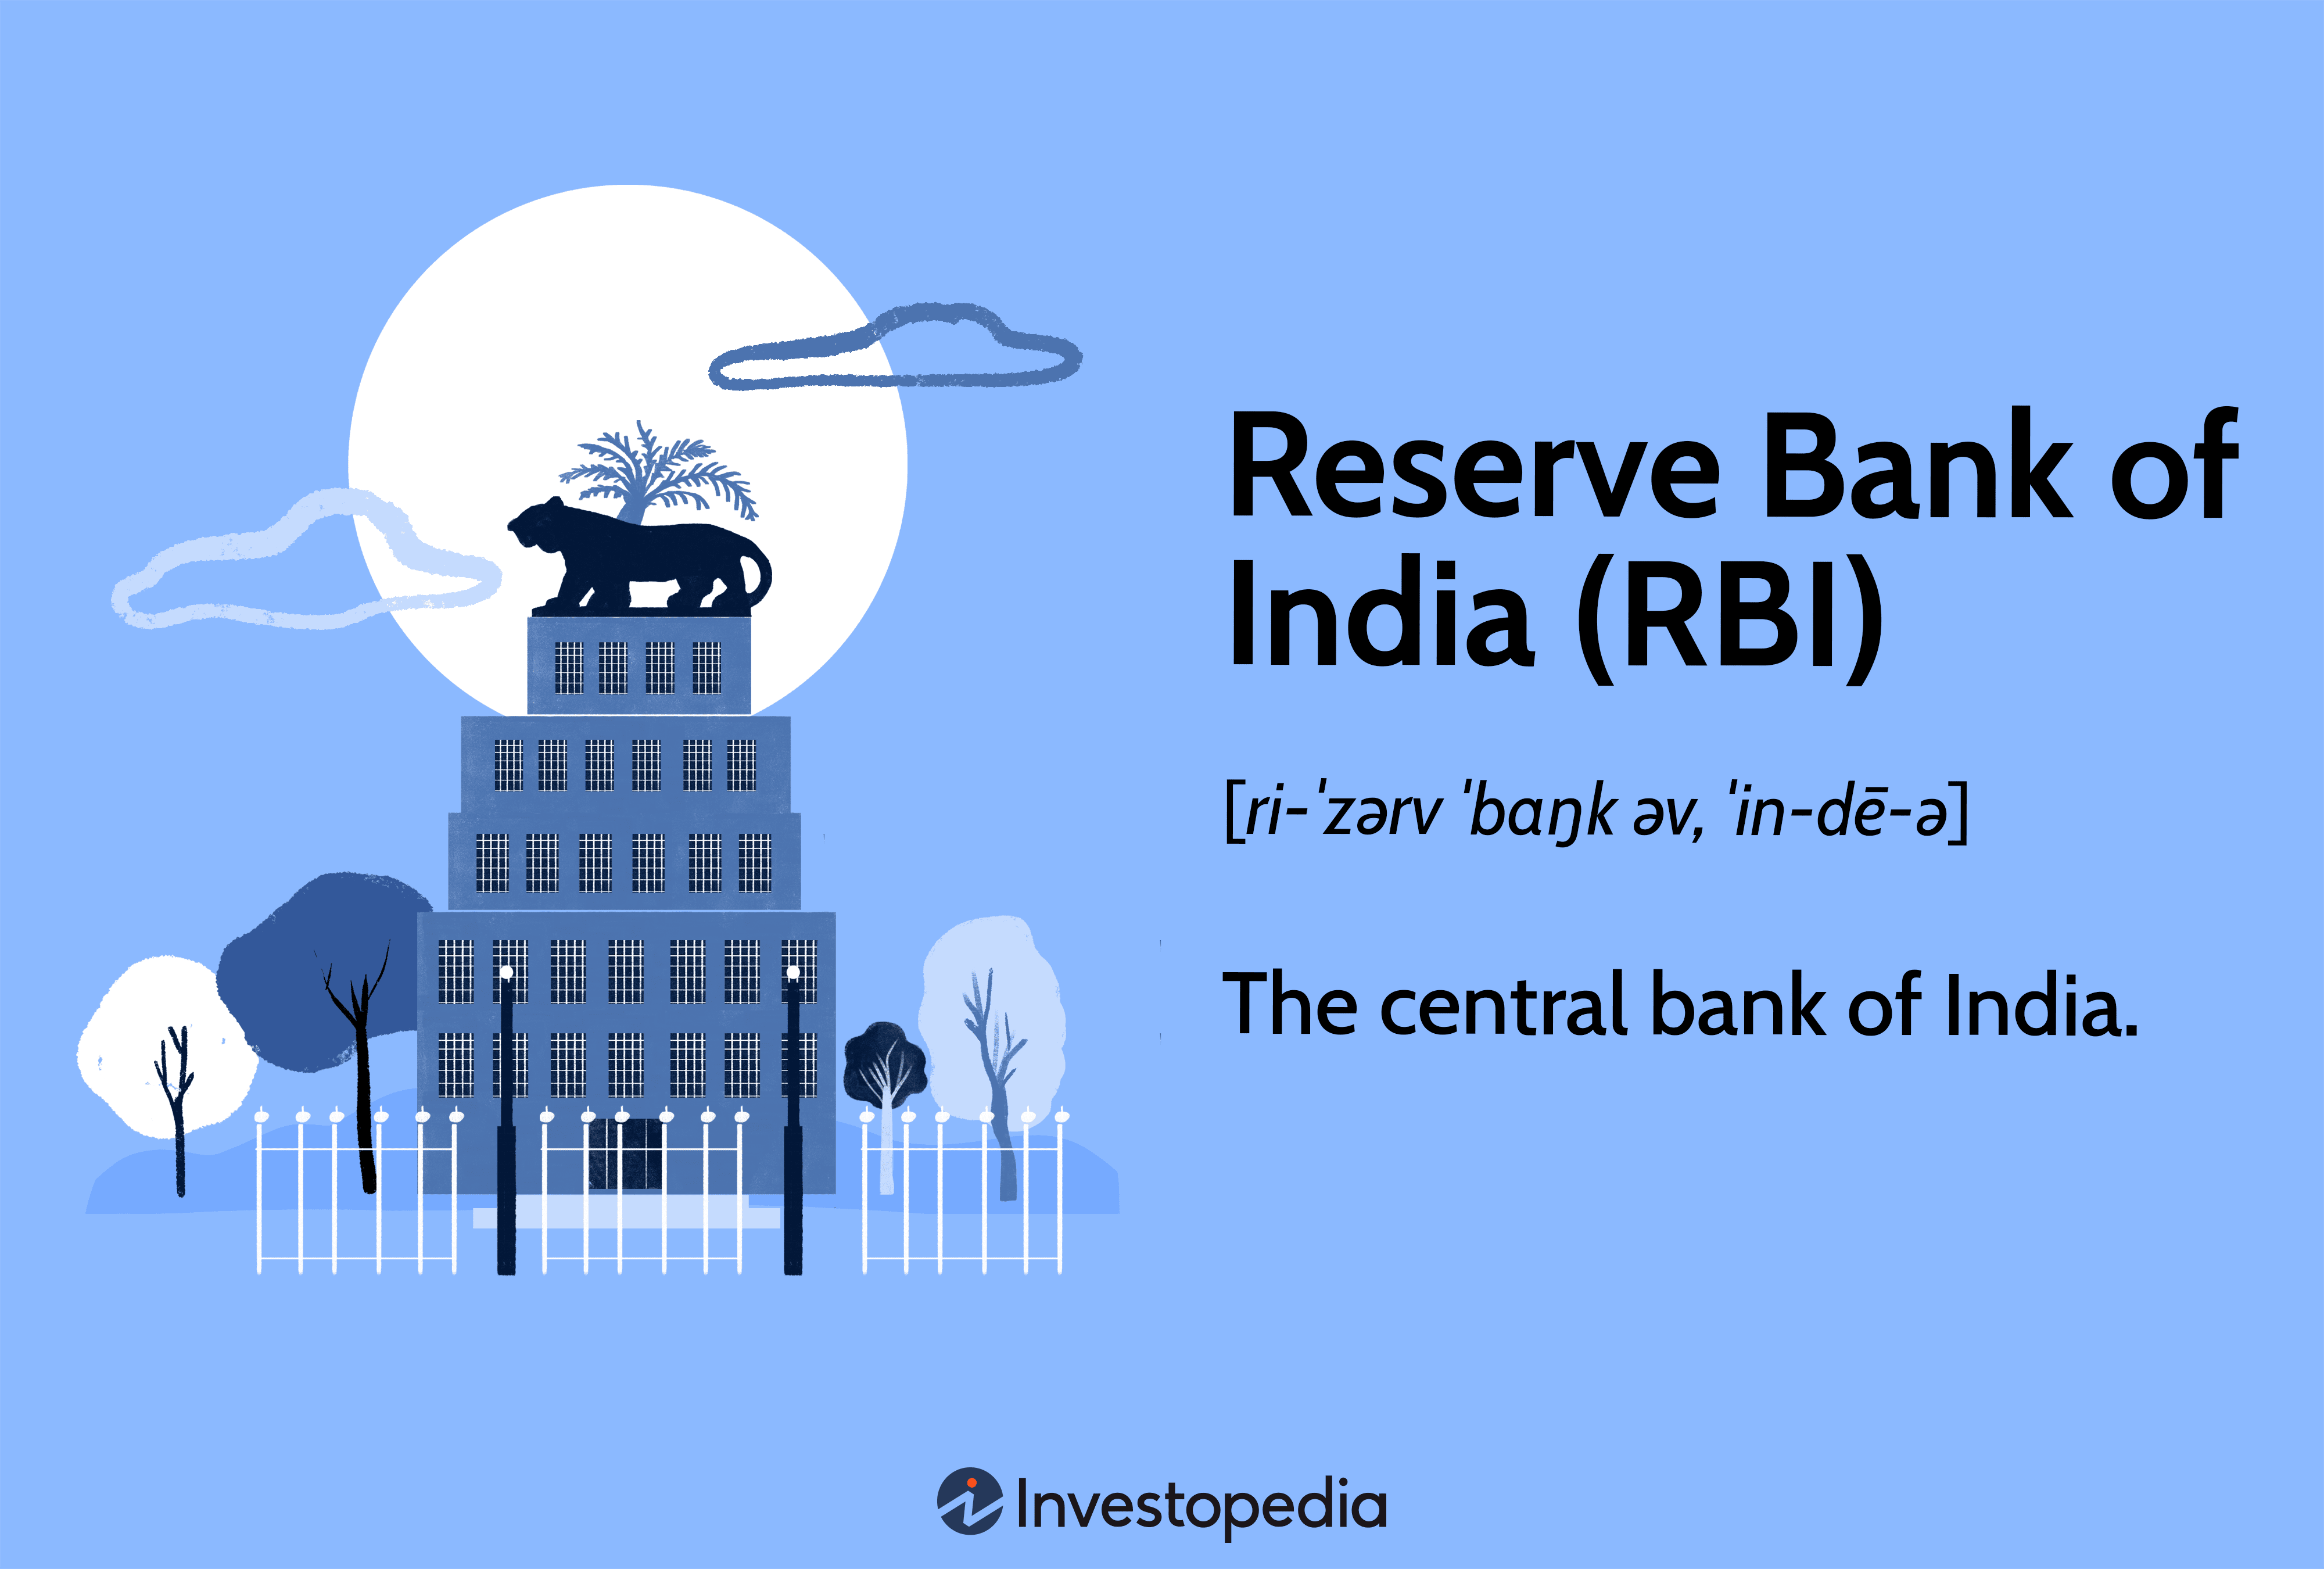 Reserve Bank of India (RBI): The central bank of India.